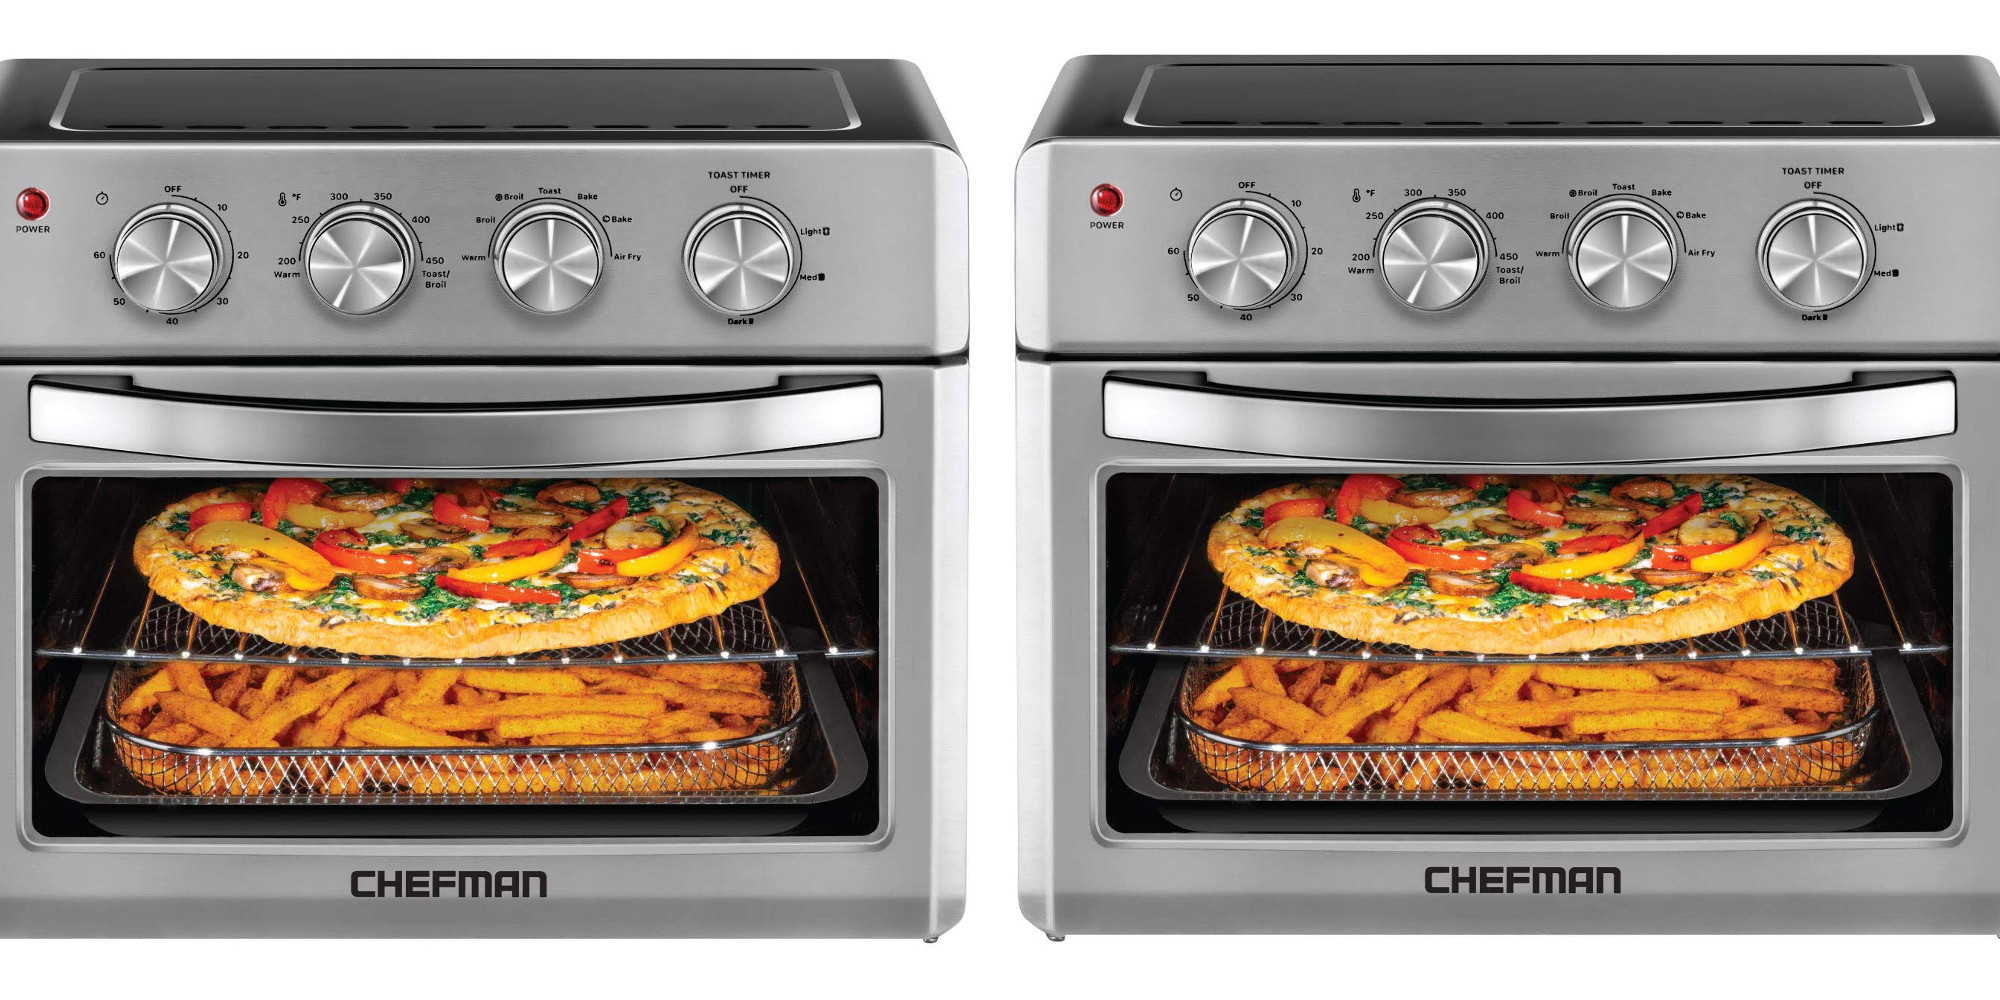 Cook a whole chicken in this Chefman air fryer toaster oven: $100